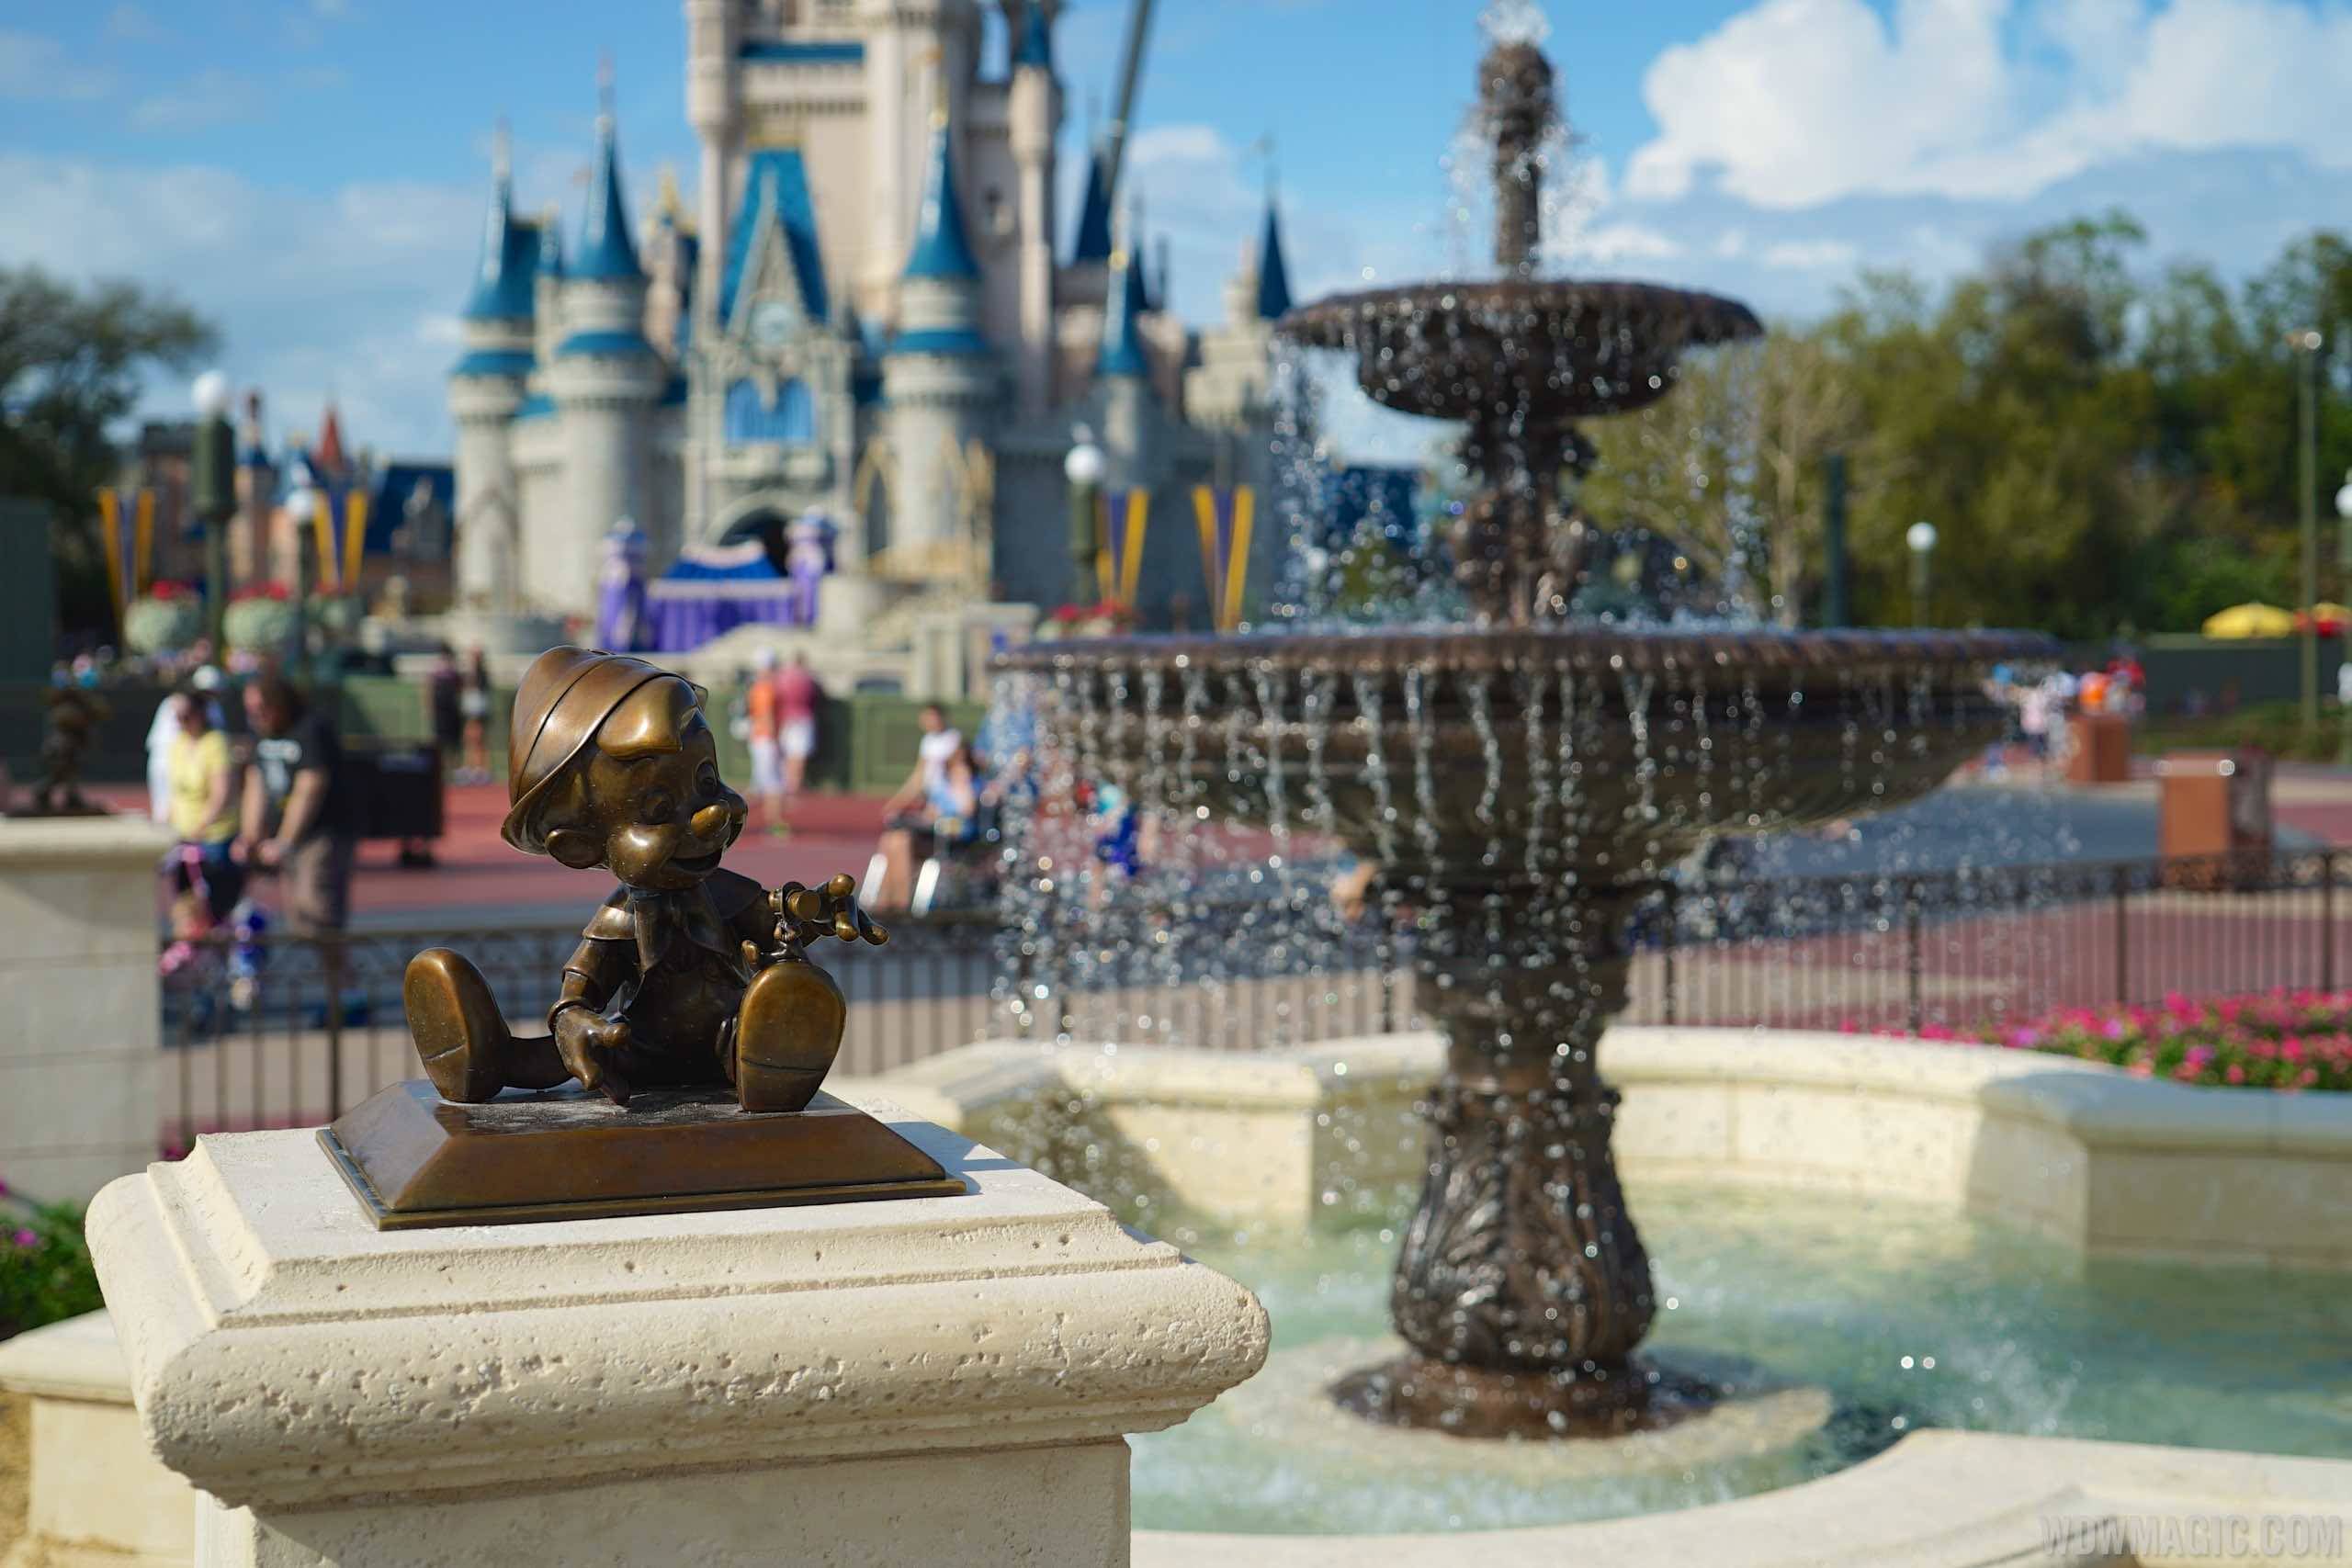 PHOTOS - Main Street Plaza Gardens east opens to guests